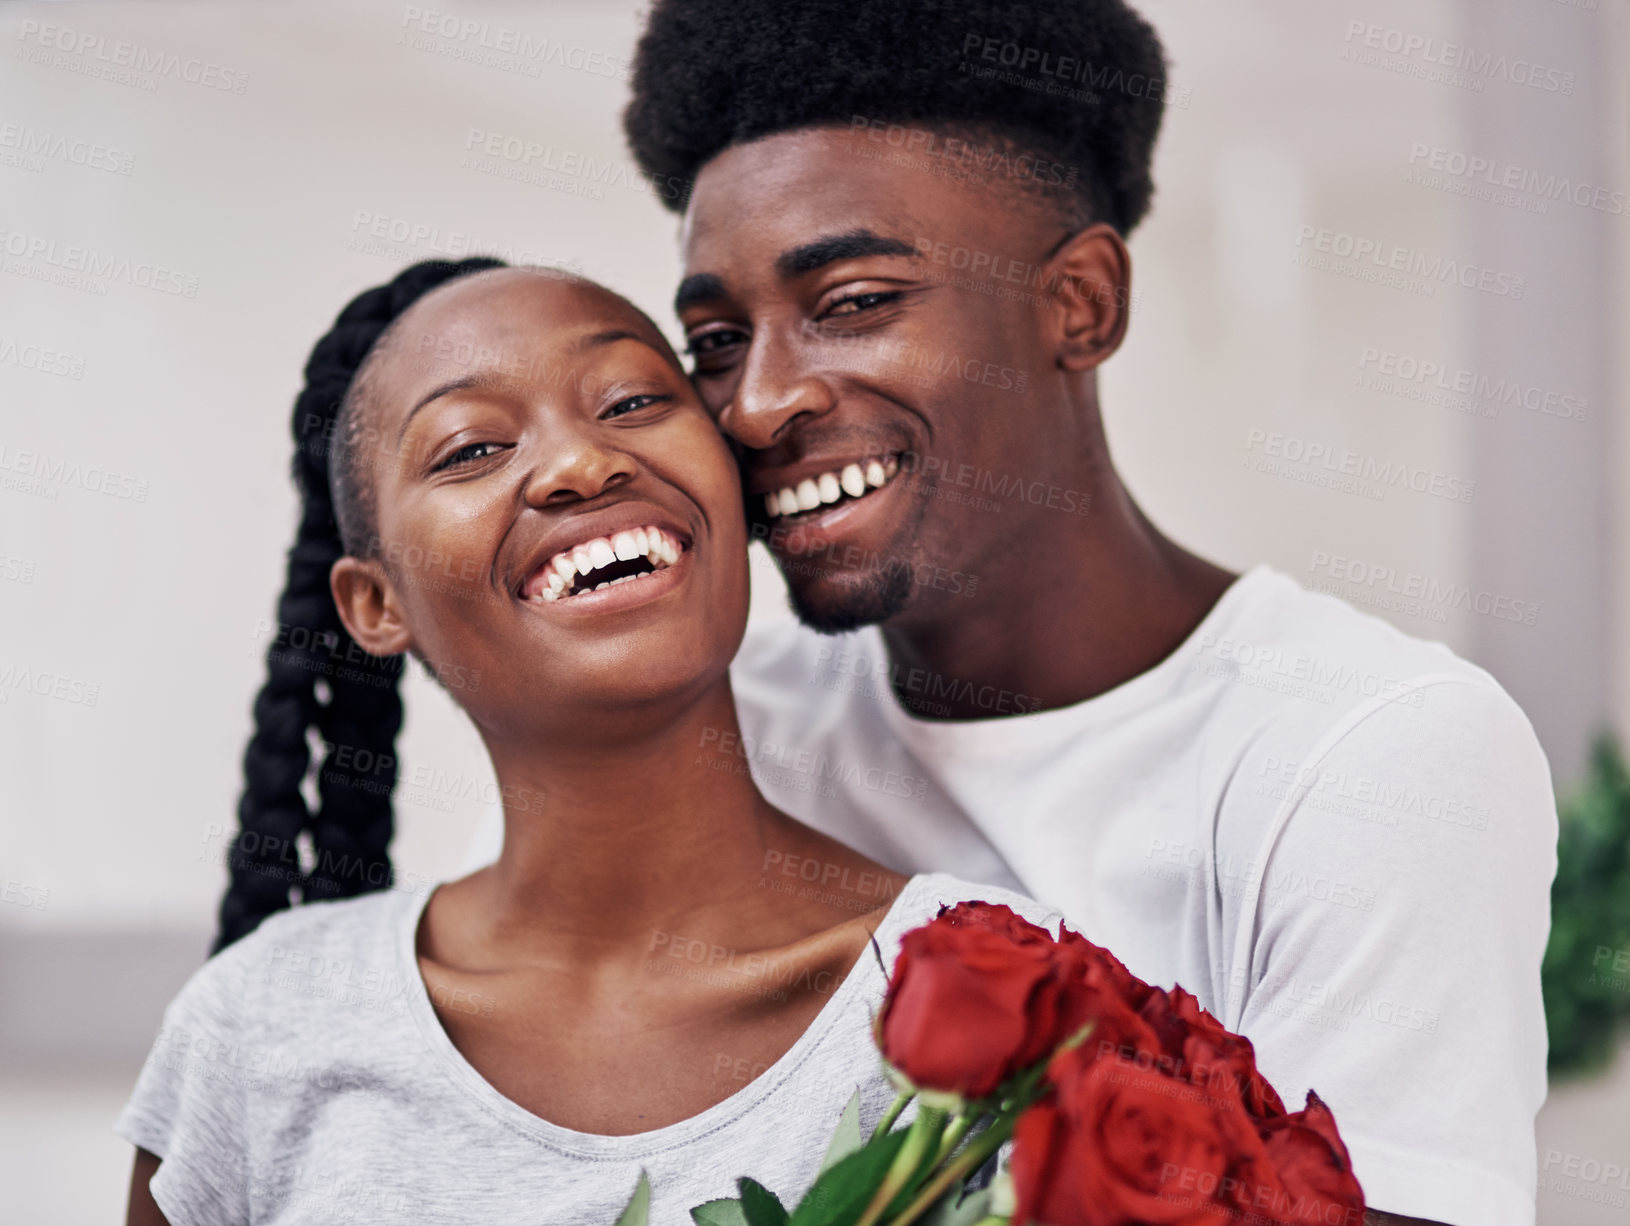 Buy stock photo Shot of a young woman holding a bunch of red roses while standing with her boyfriend at home